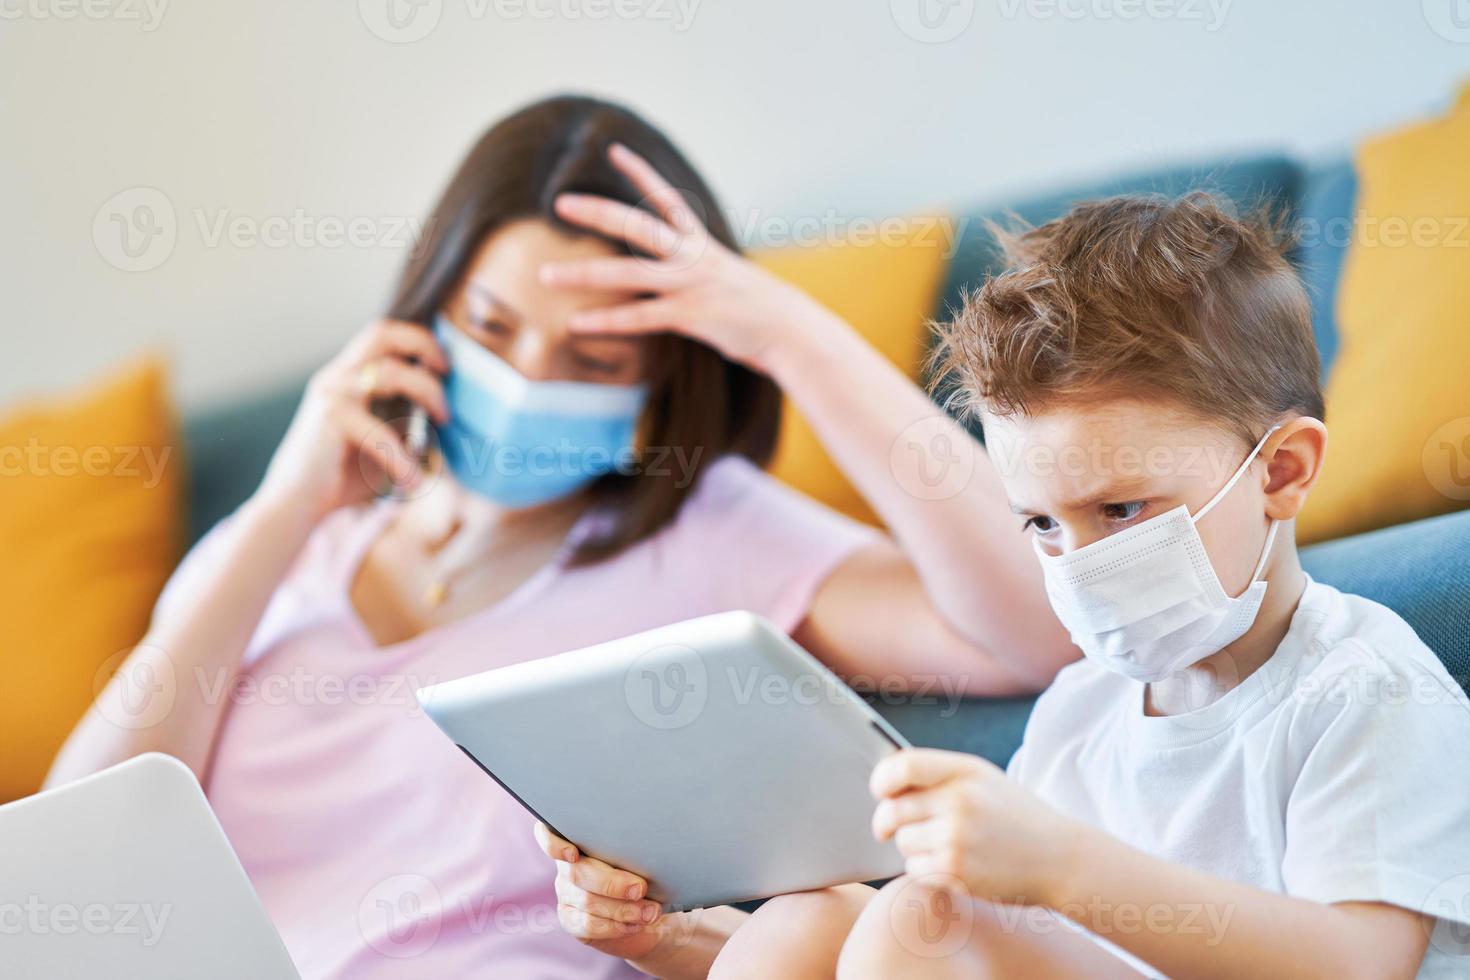 Boy and exhausted mother trying to work at home during coronavirus pandemic photo